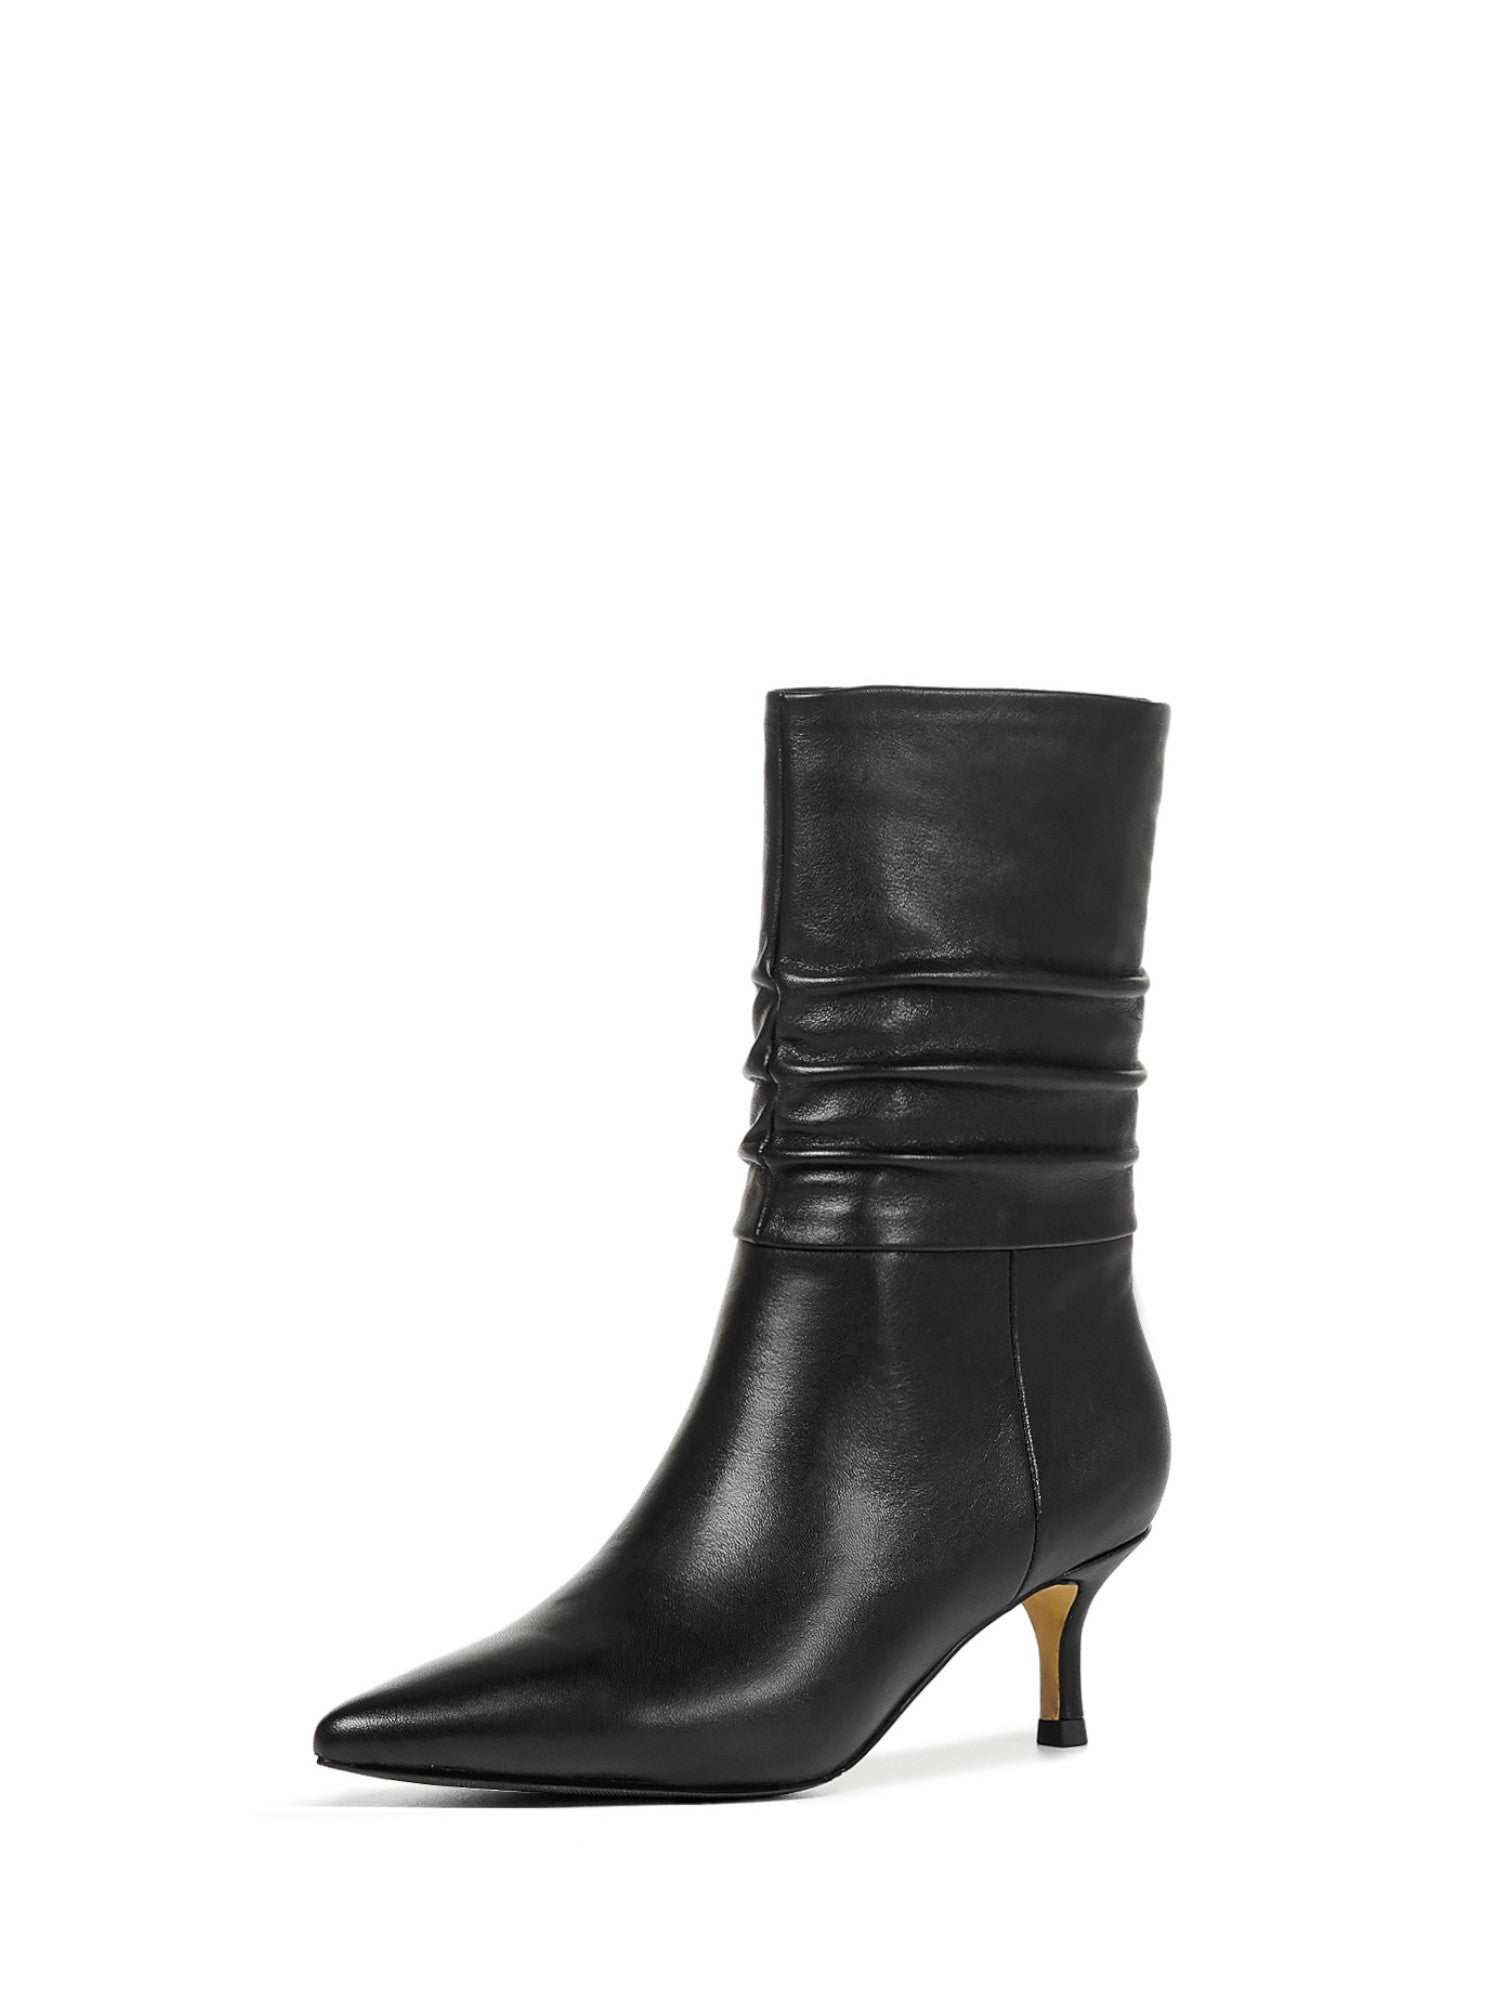 ROLISA-Milo-Slouchy-Ruched-Leather-Kitten-Heels-Mid-Calf-Boots-Black